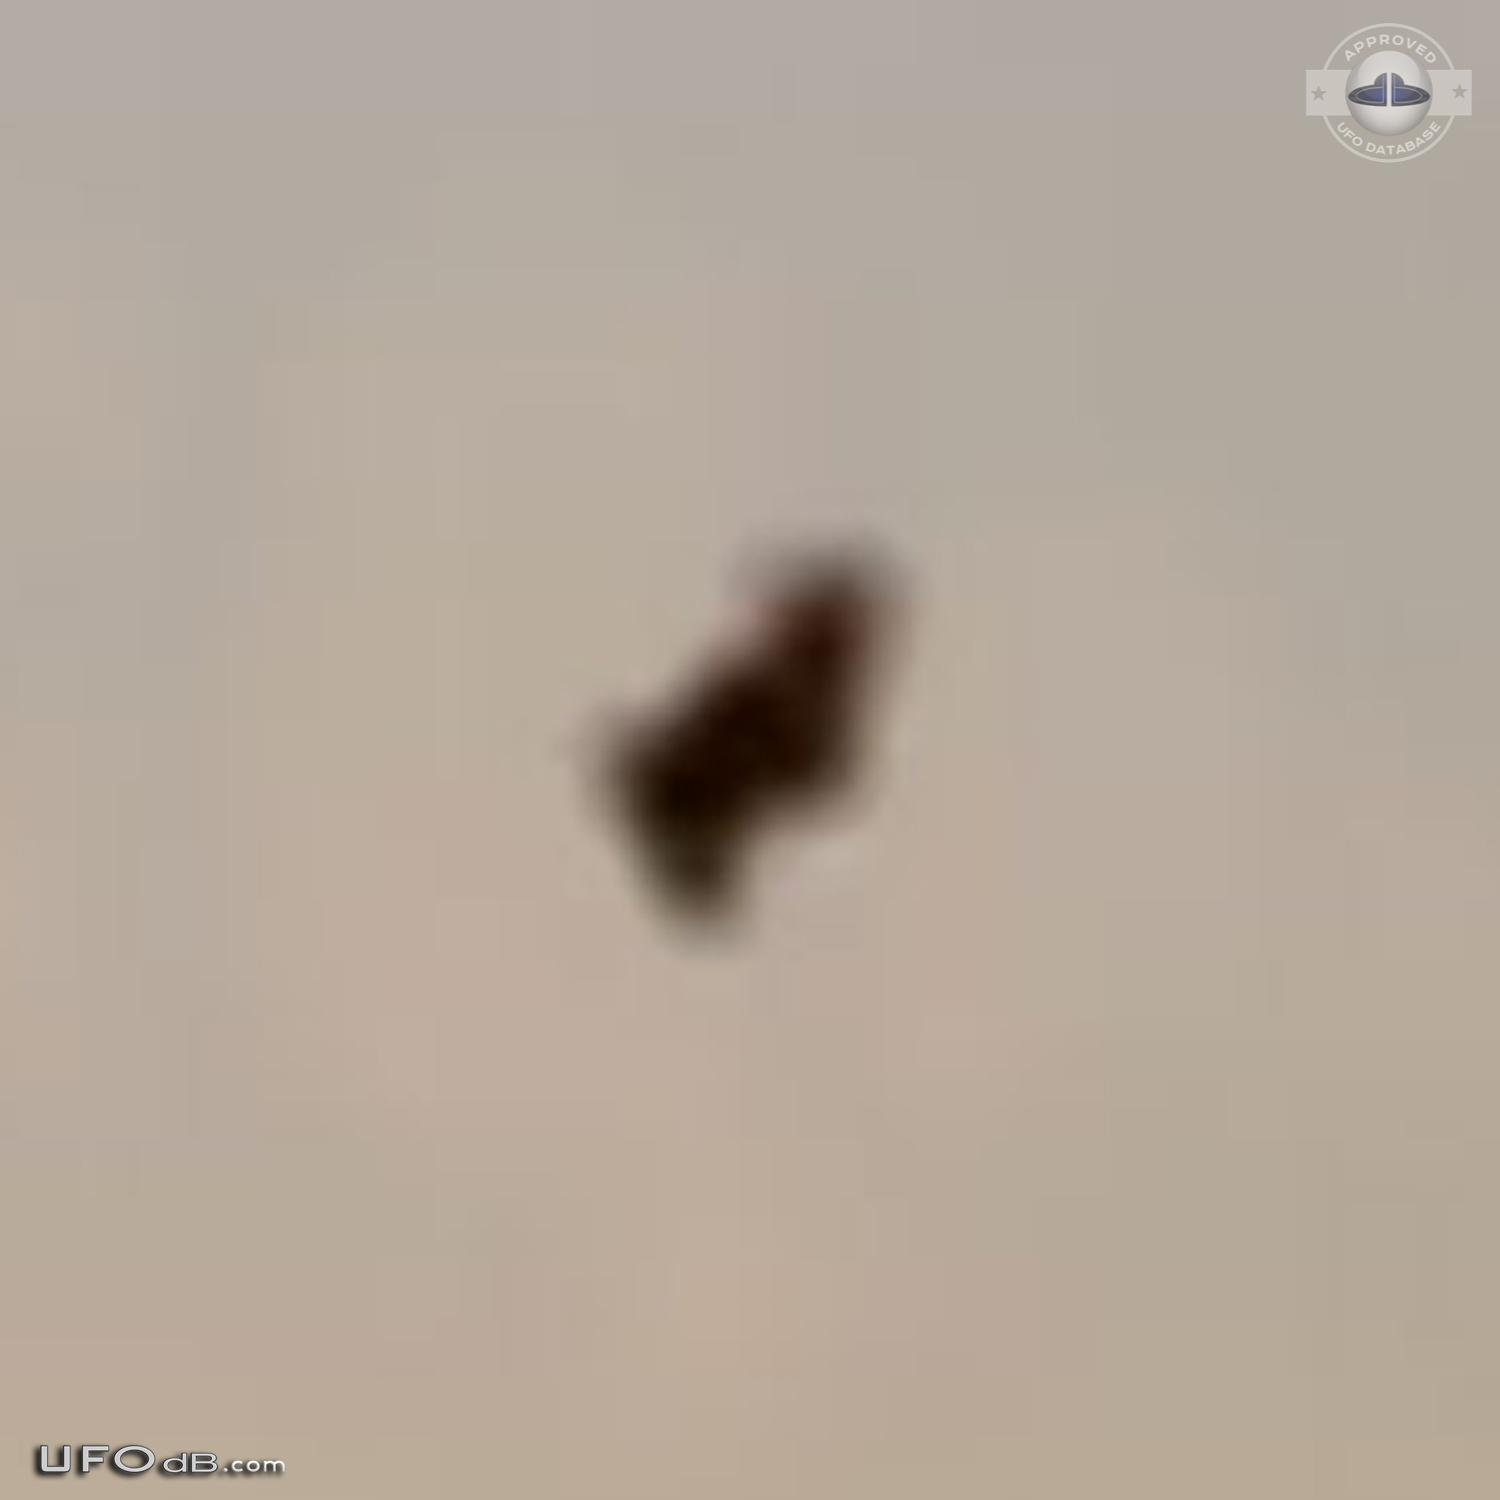 Bright metallic UFO caught on picture over Nasice, Croatia in May 2008 UFO Picture #471-4